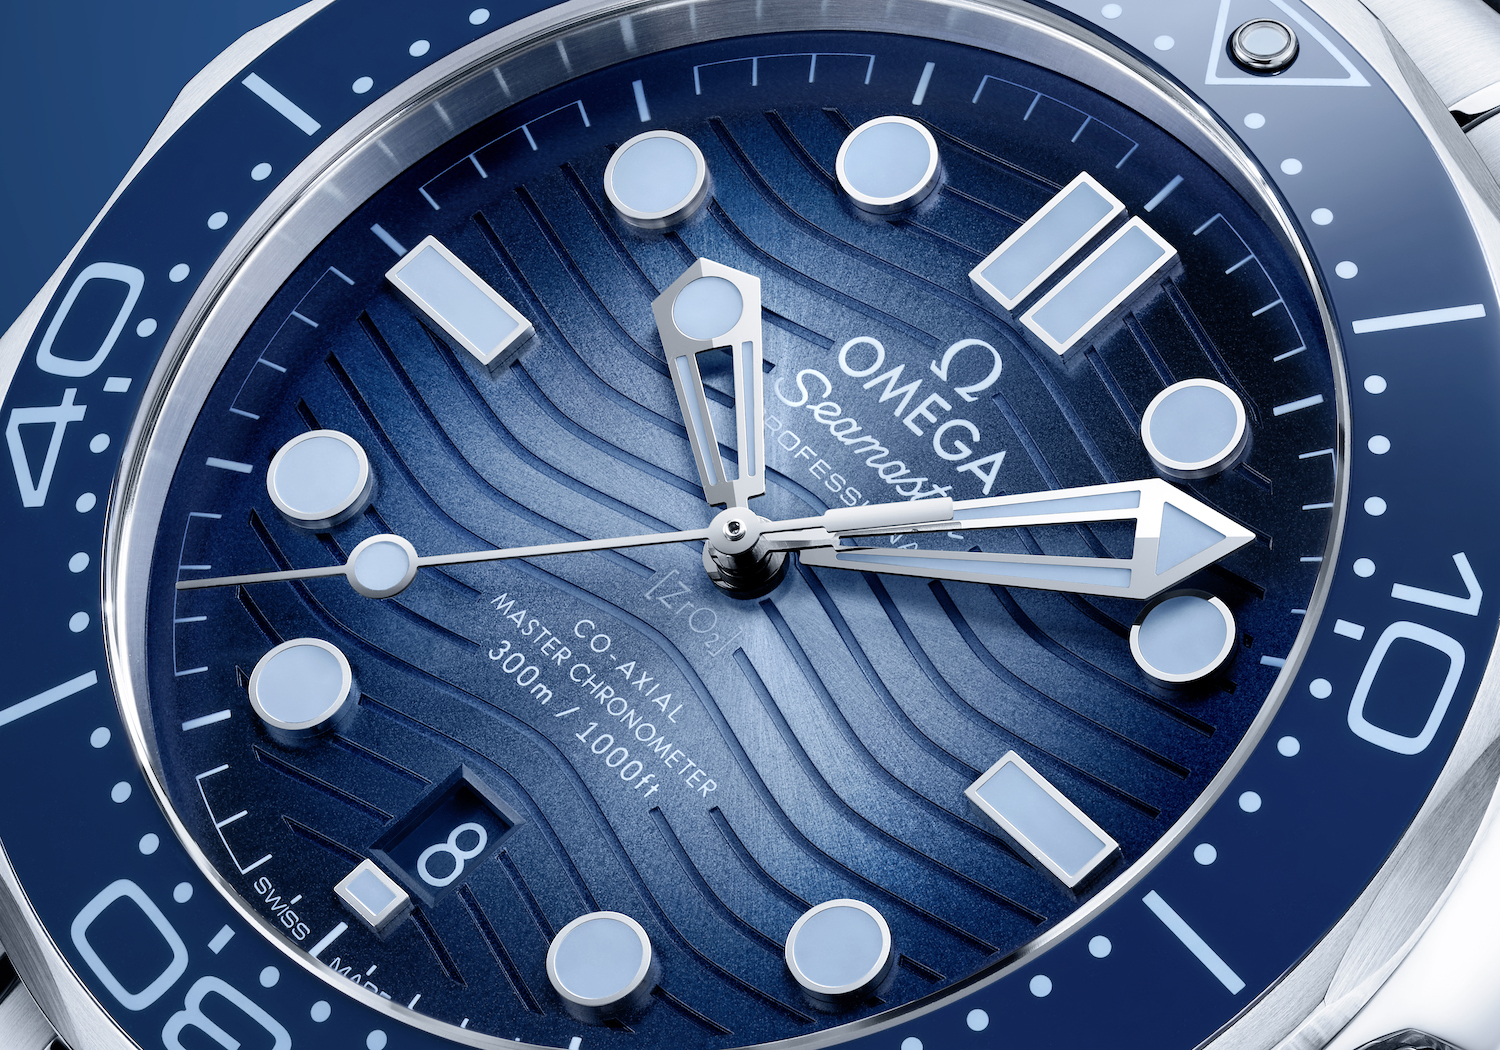 Up-close shot of watch face with multiple shades of blue and design features resembling ocean waves.